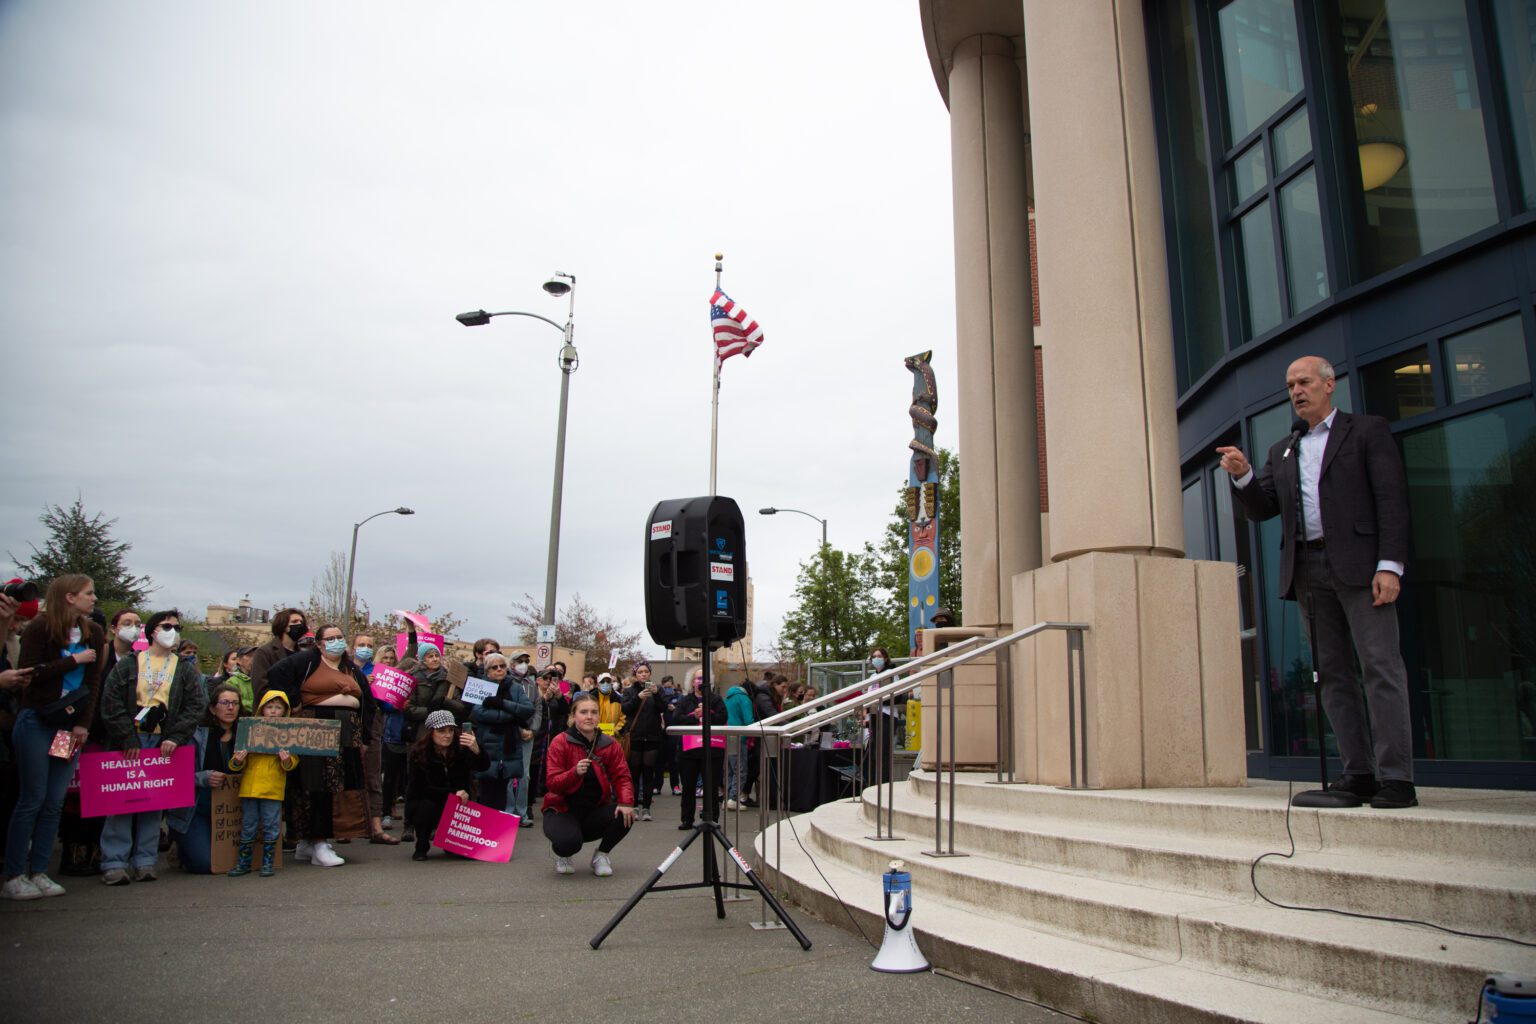 U.S. Rep. Rick Larsen speaks in front of the Whatcom County Courthouse as a crowd listens.